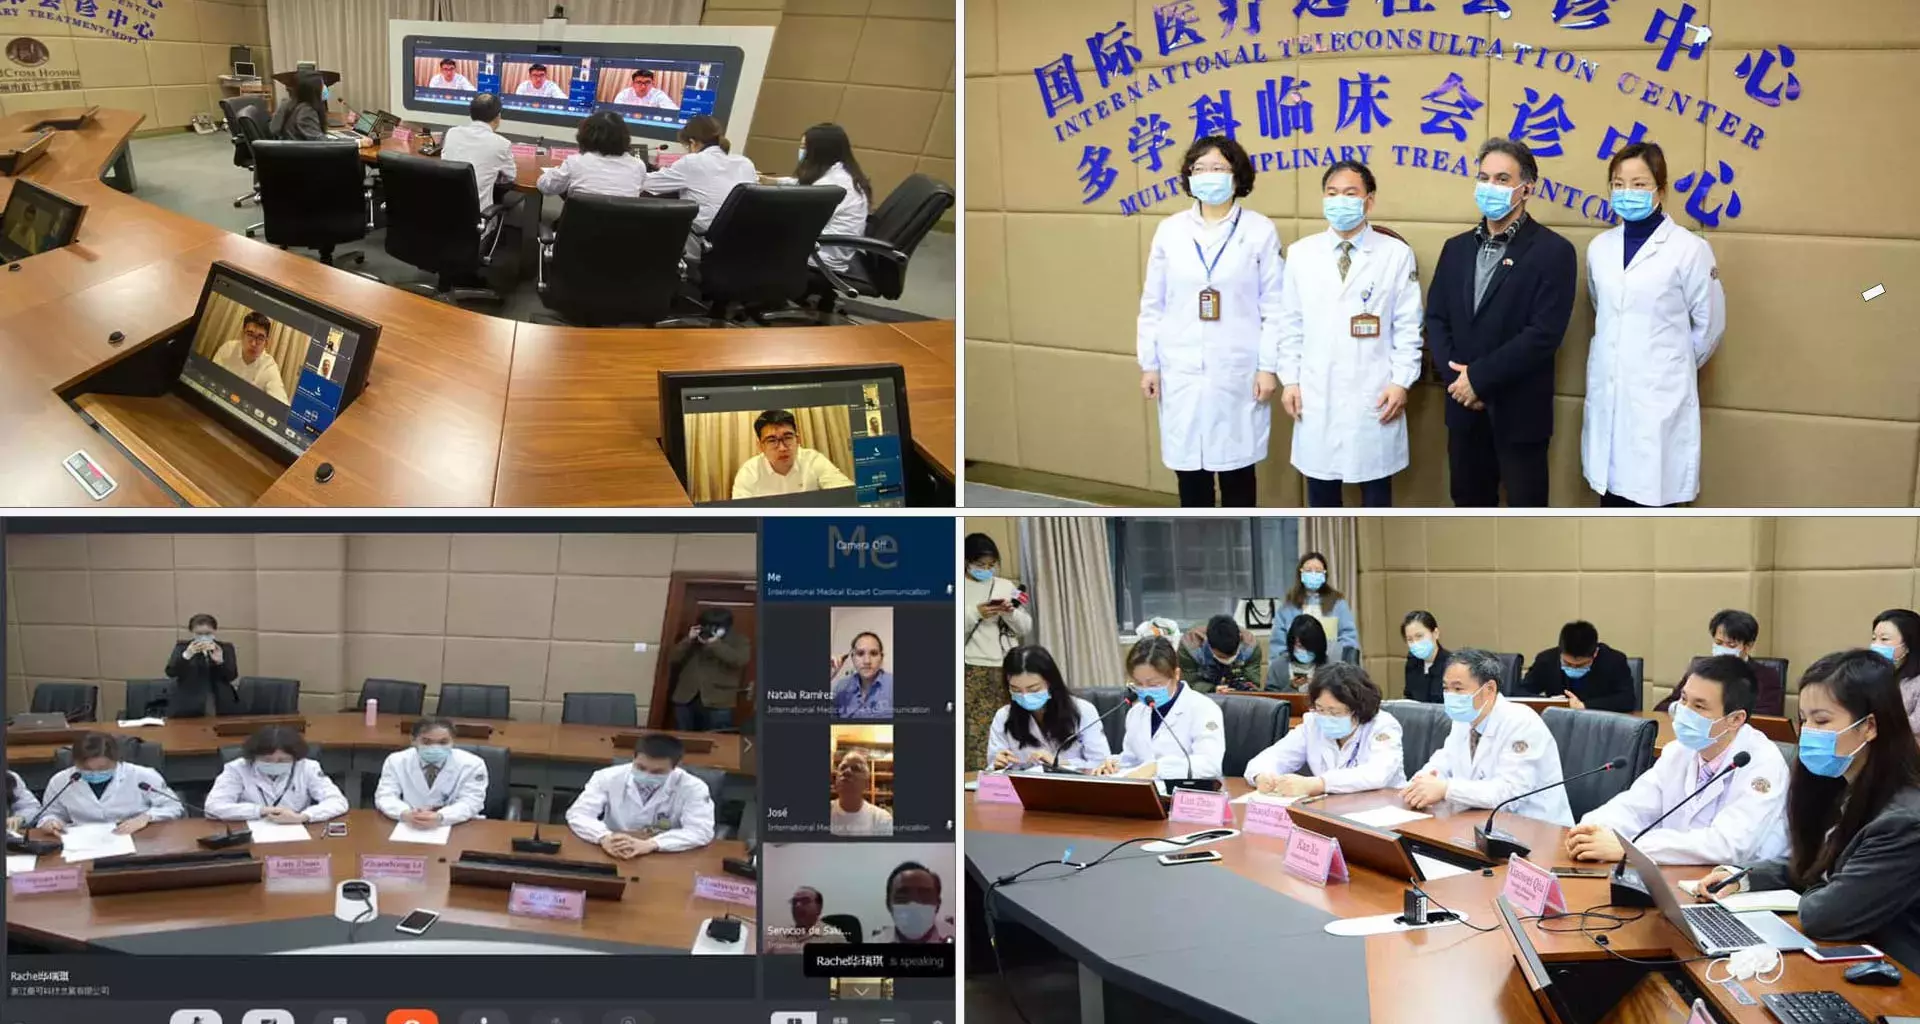 Tec brings Chinese and Mexican doctors together in struggle against COVID-19